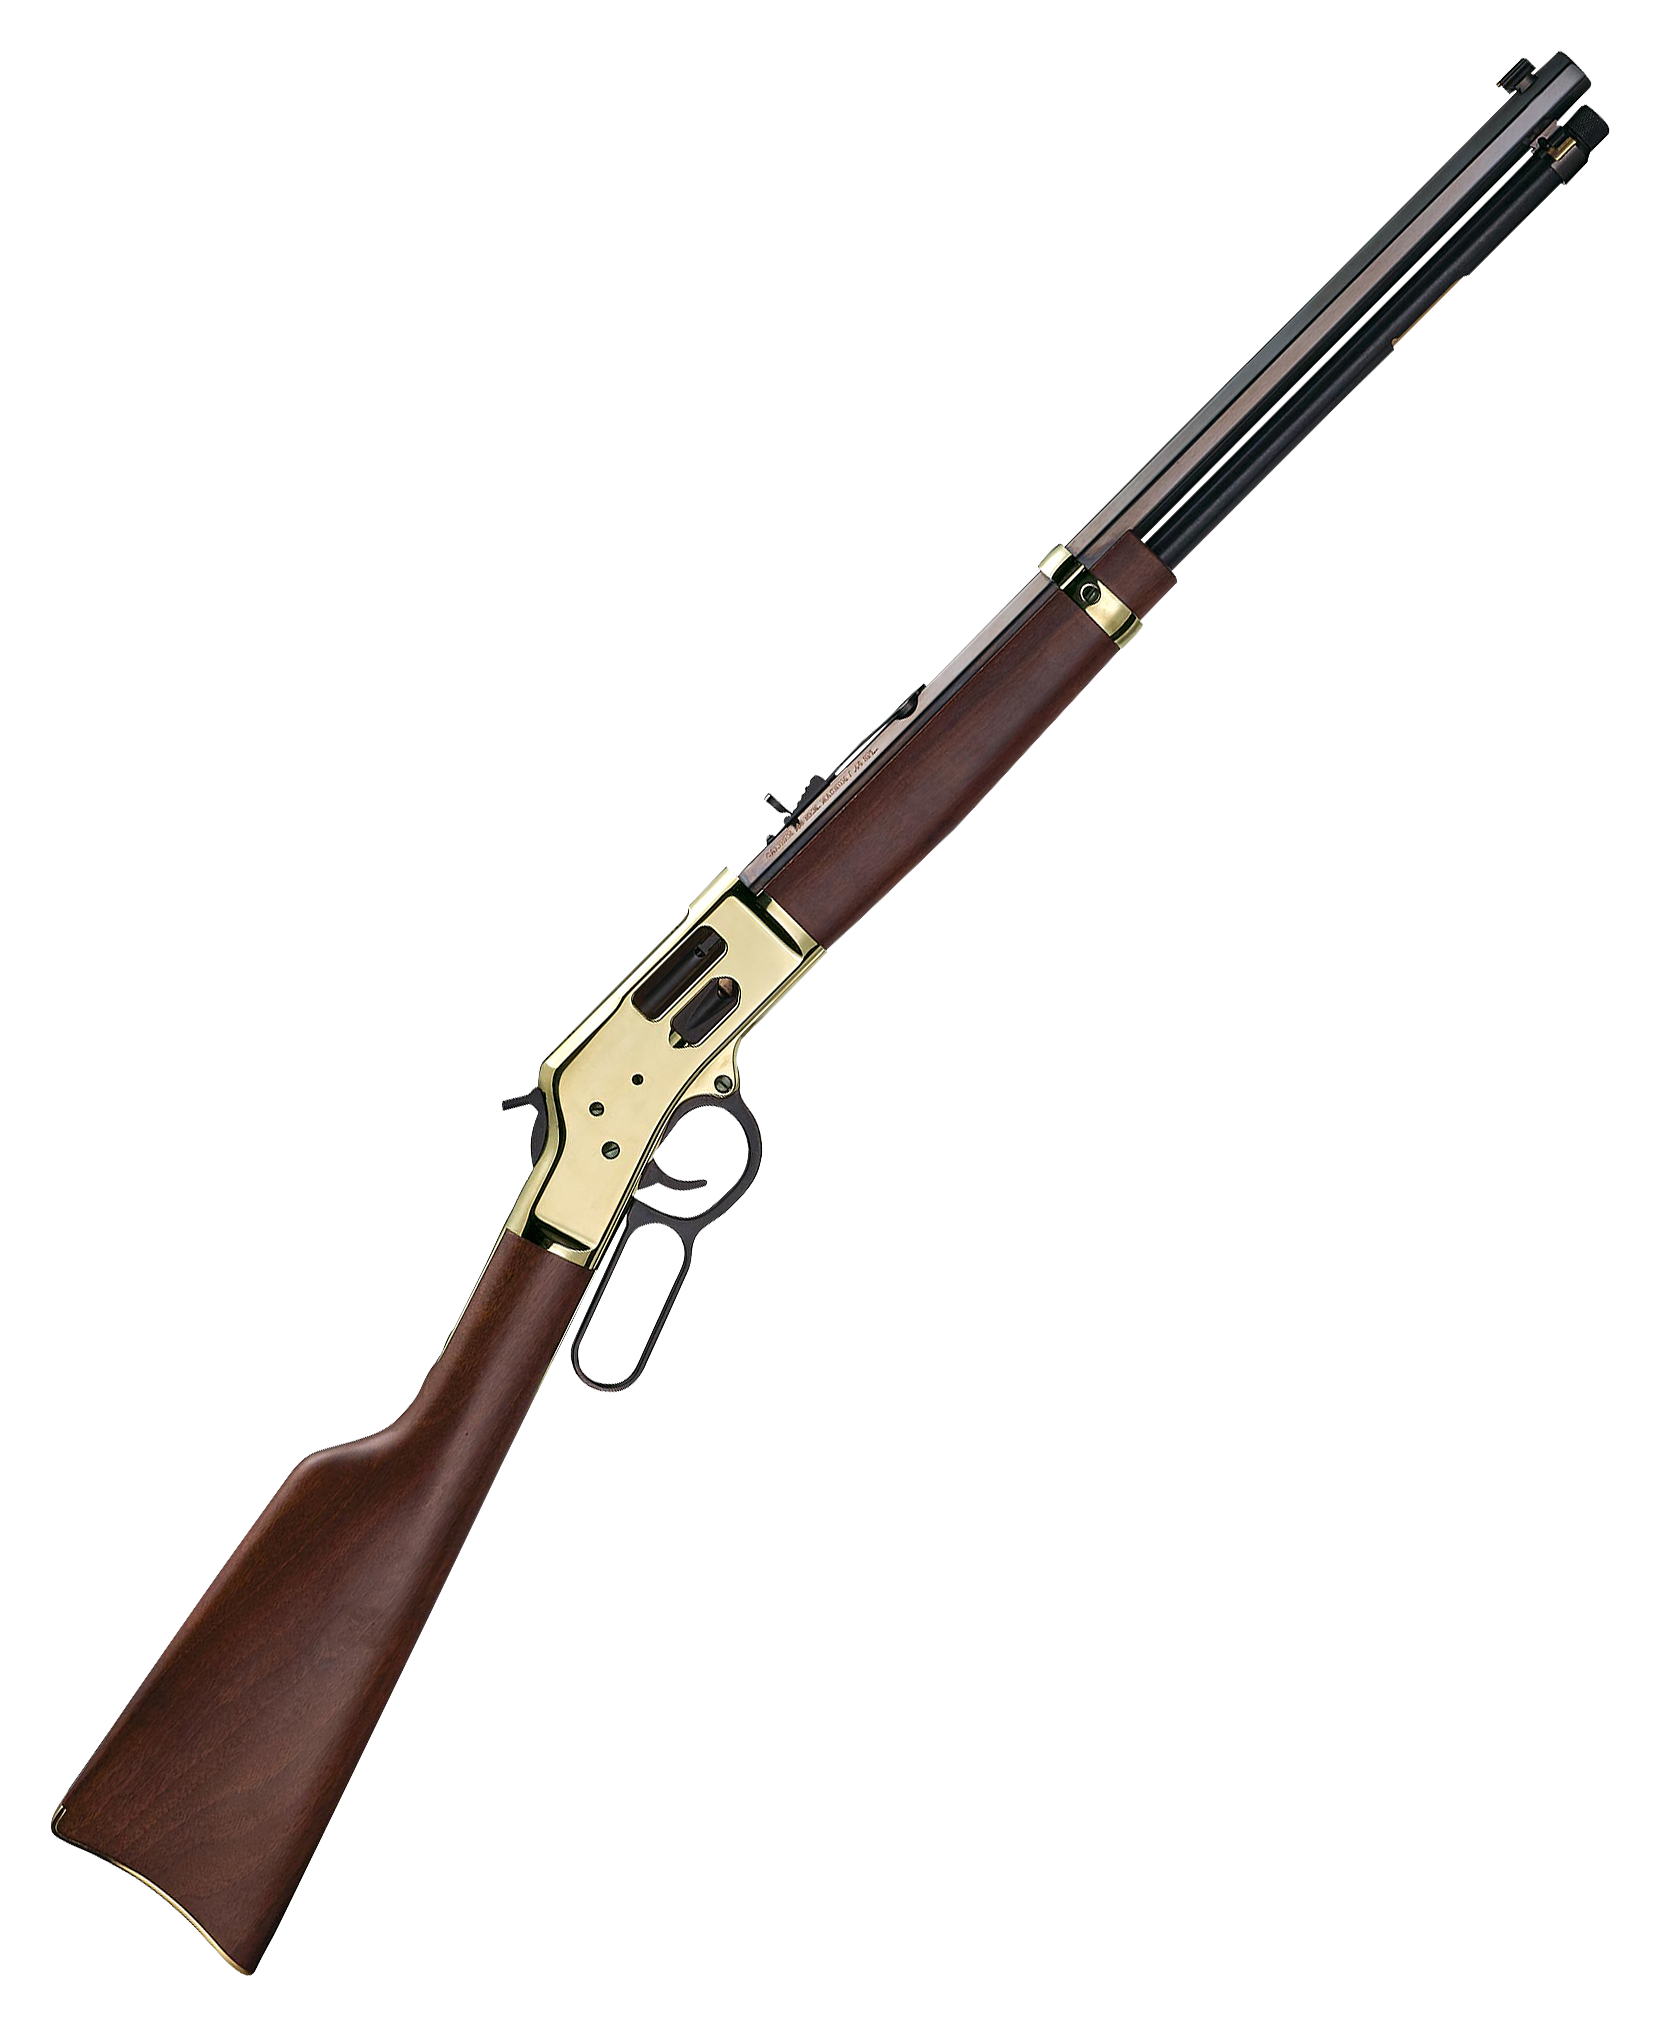 Henry Big Boy Brass Side Gate Polished Hardened Brass Lever Action Rifle - 45 (Long) Colt - 20in - Brown -  H006GC